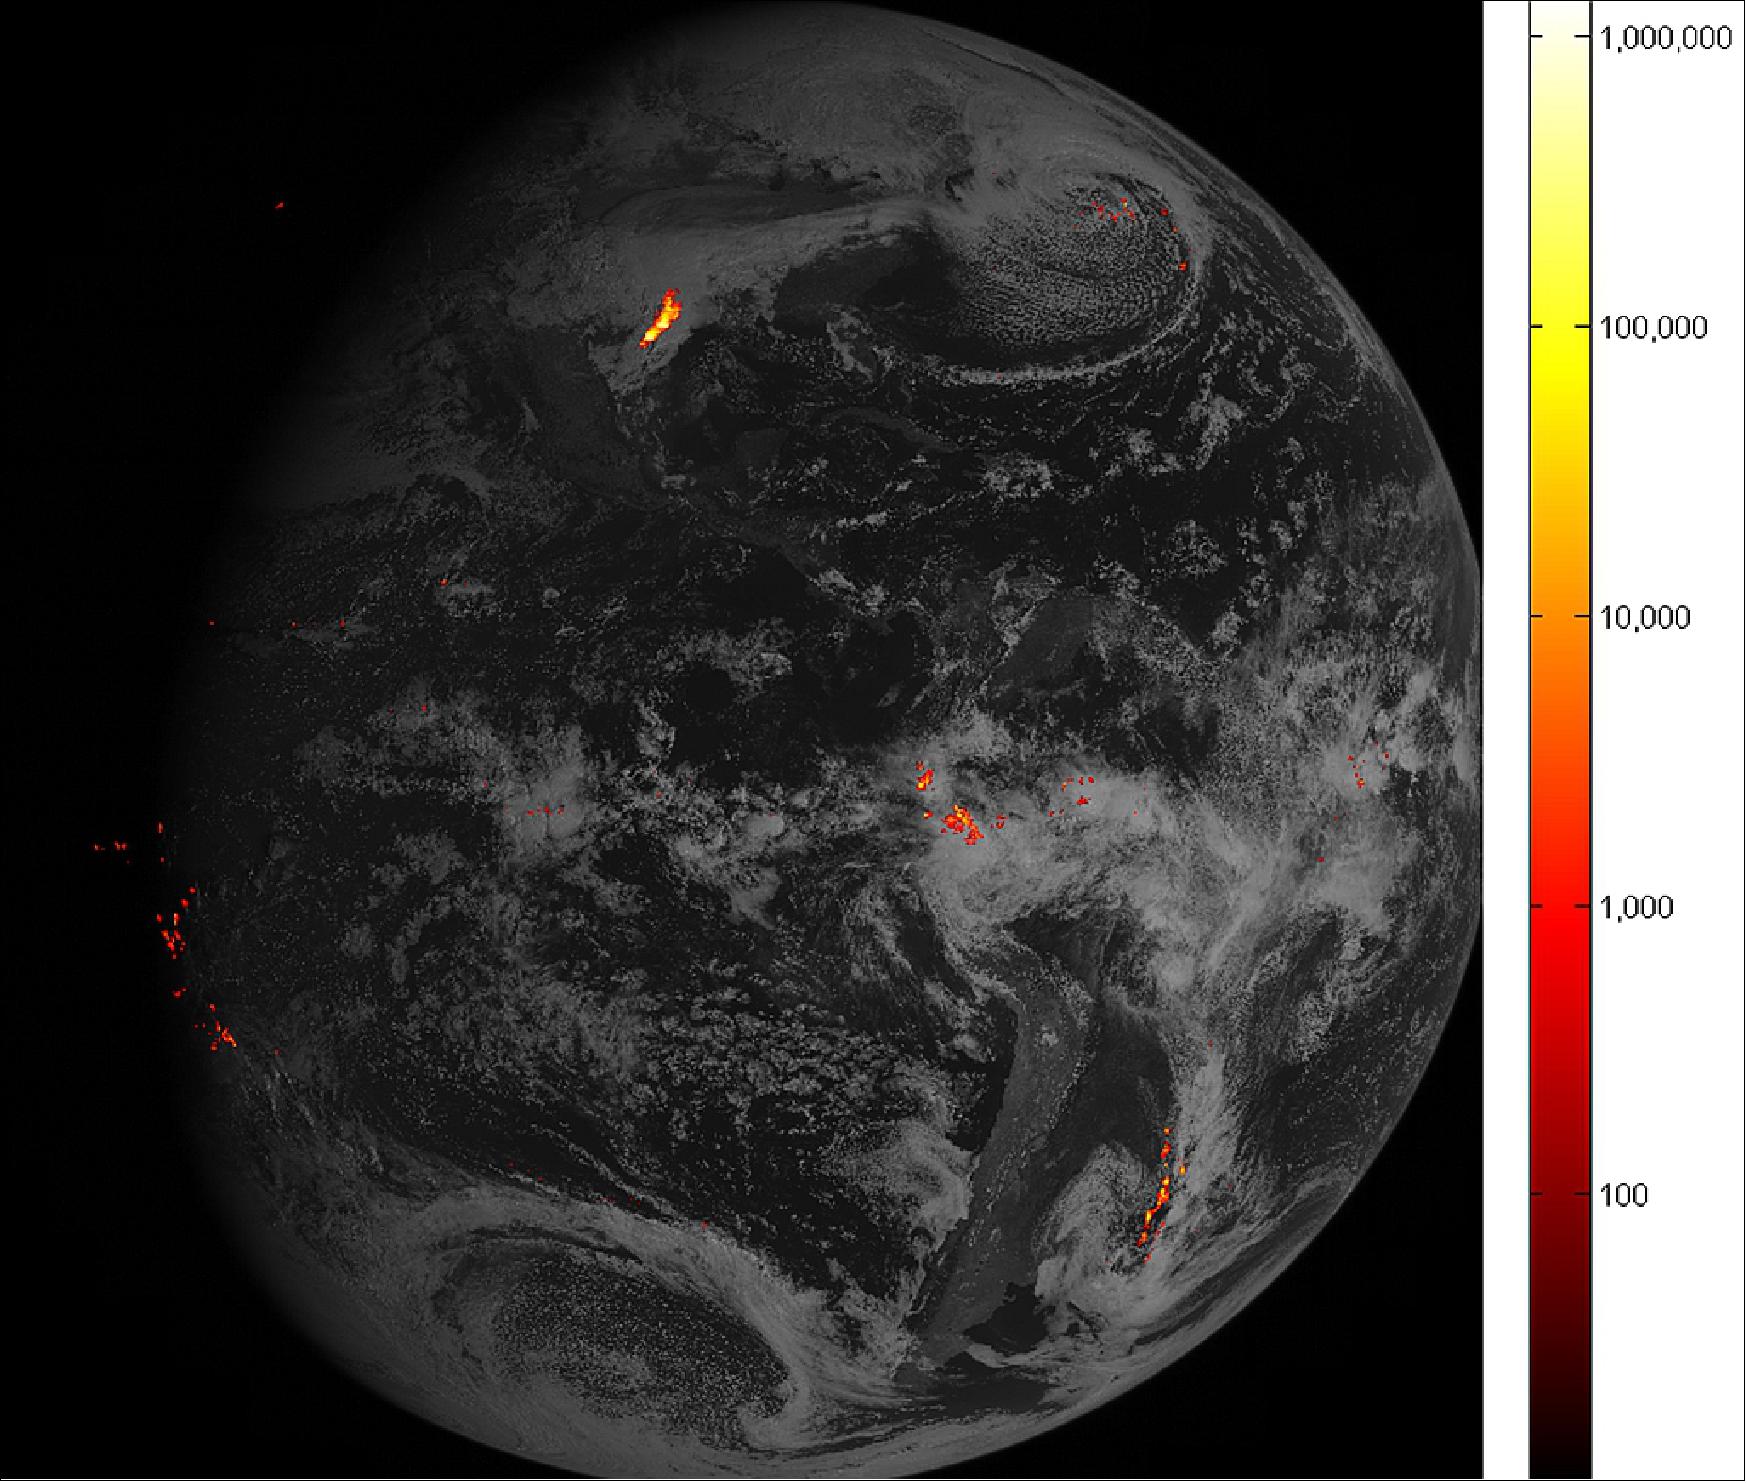 Figure 18: This is one hour of GOES-16's GLM (Geostationary Lightning Mapper) lightning data from Feb. 14, when GLM acquired 1.8 million images of the Earth. It is displayed over GOES-16 ABI full disk Band 2 imagery. Brighter colors indicate more lightning energy was recorded; the color bar units are the calculated kW-hours of total optical emissions from lightning. The brightest storm system is located over the Gulf Coast of Texas (image credit: NOAA, NASA)